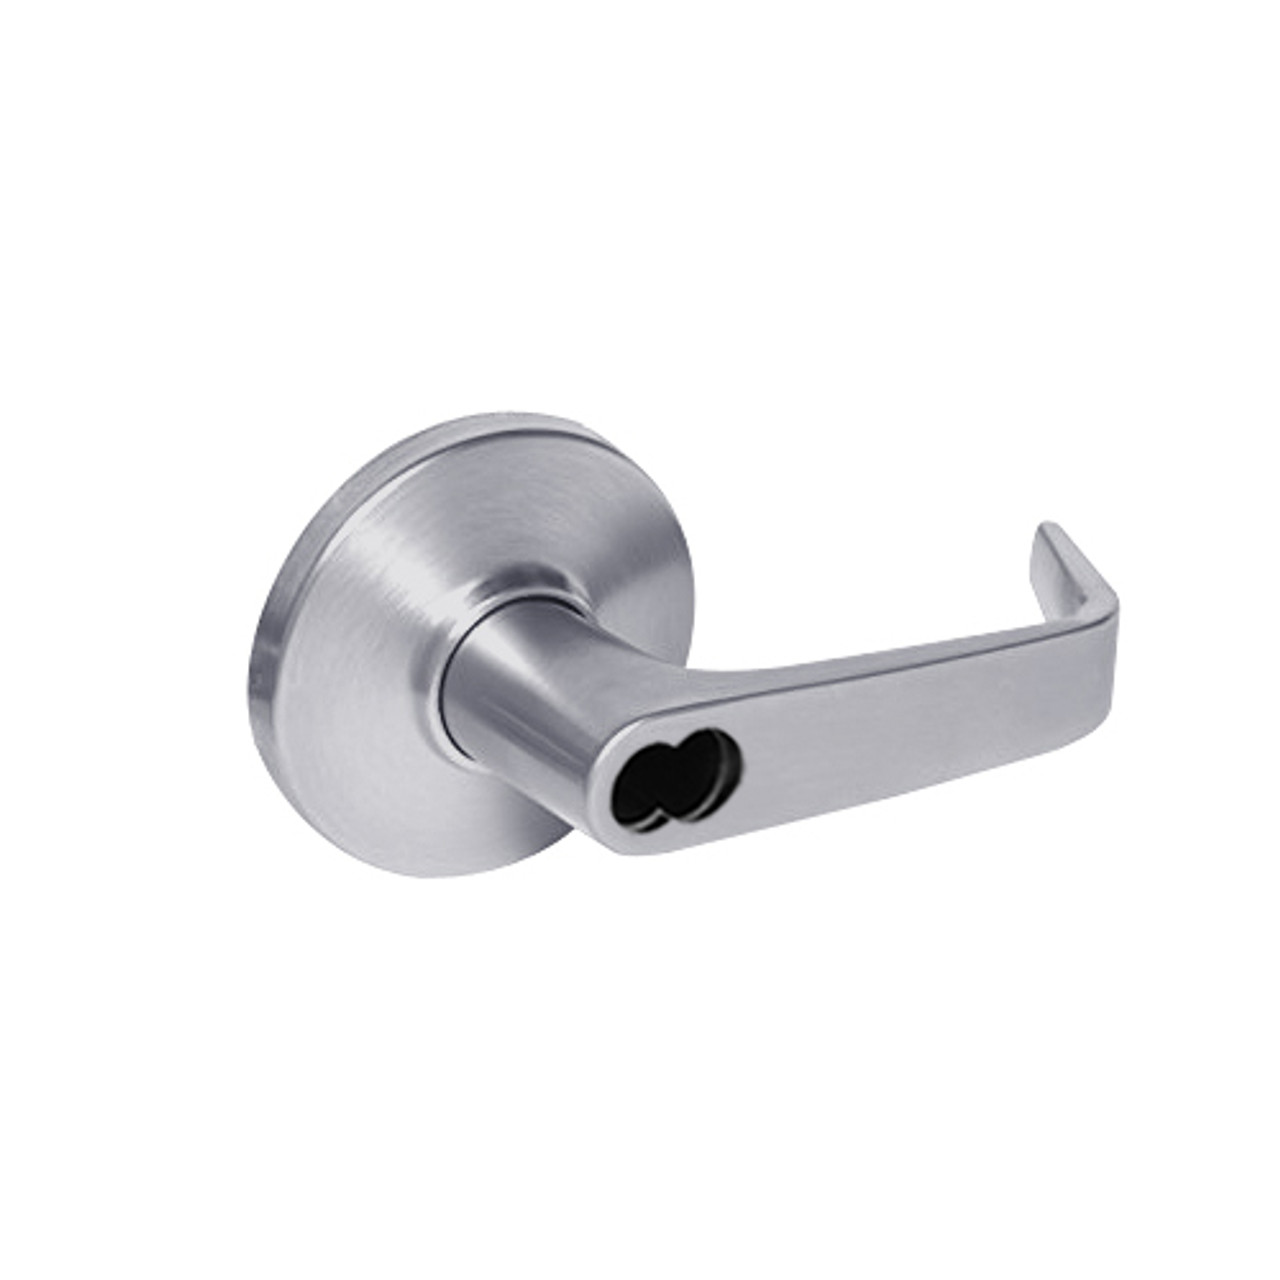 9K57AB15DS3626 Best 9K Series Entrance Cylindrical Lever Locks with Contour Angle with Return Lever Design Accept 7 Pin Best Core in Satin Chrome